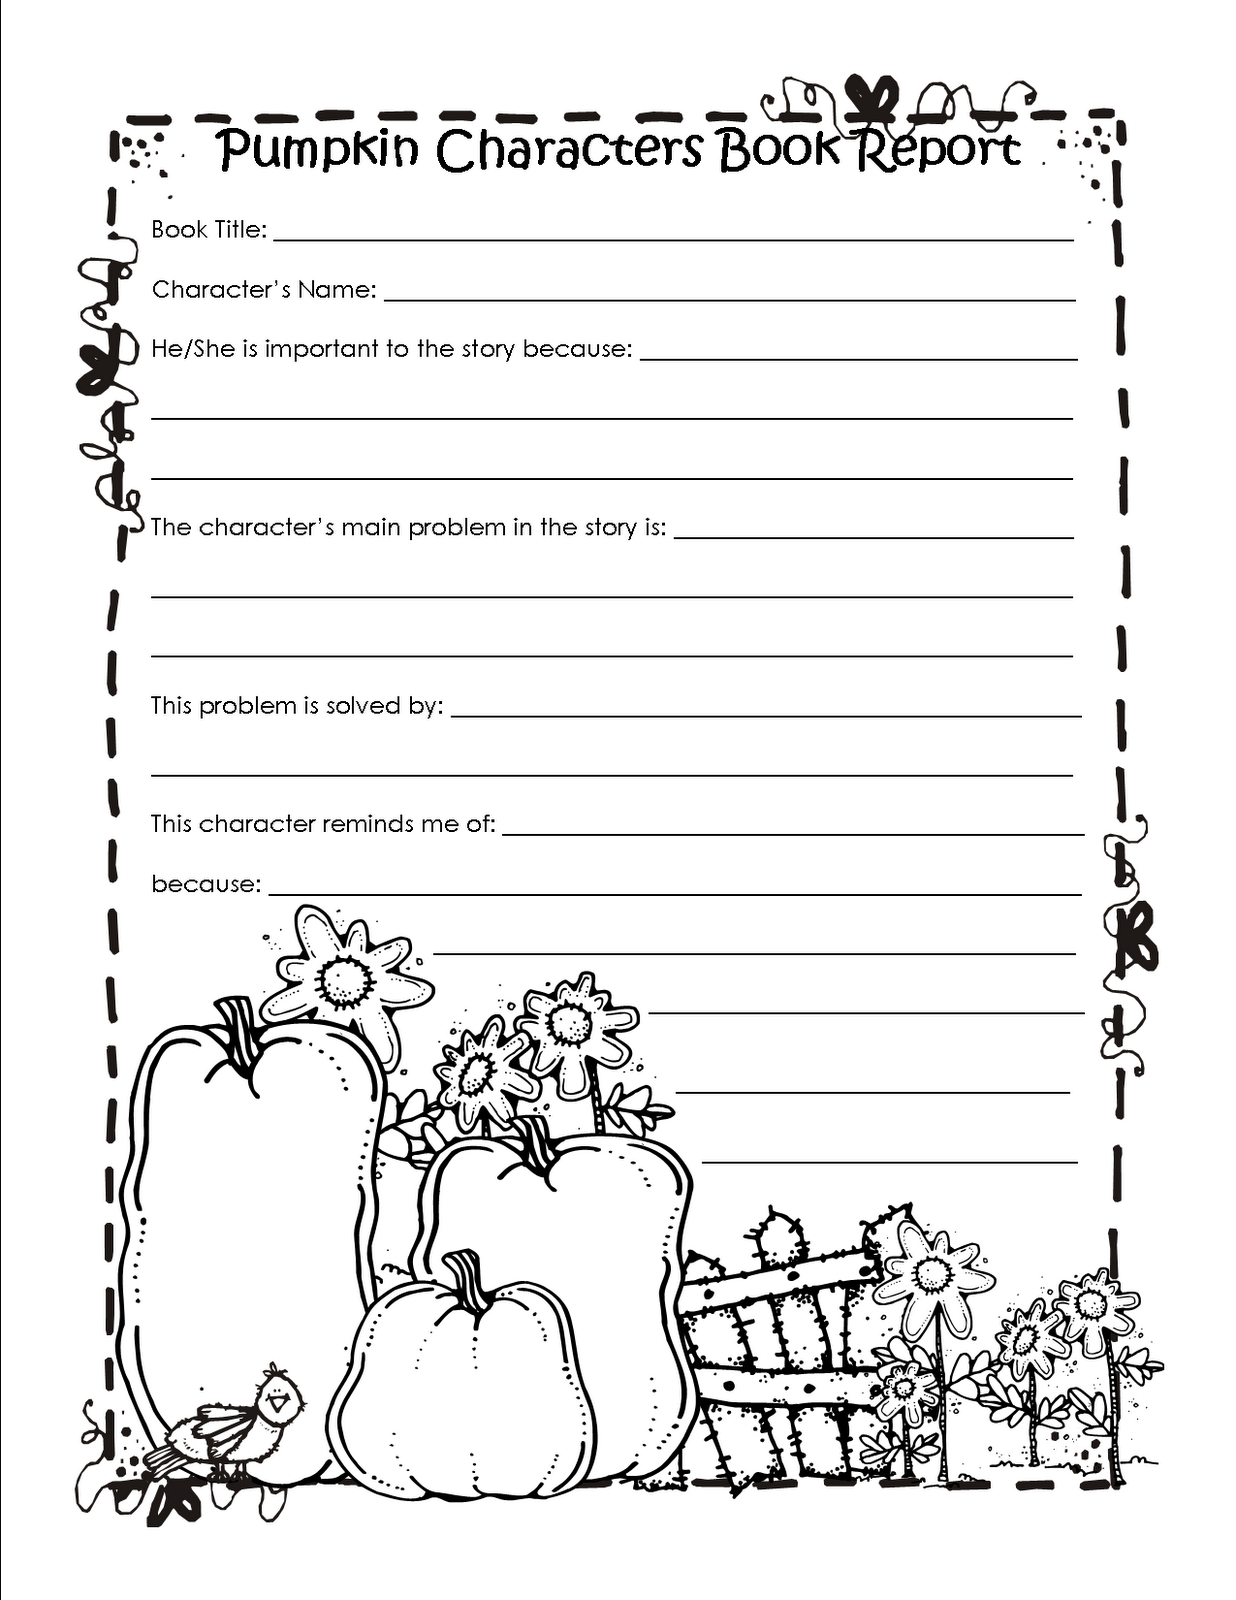 Non Fiction | Free Kids Books Intended For Second Grade Book Report Template